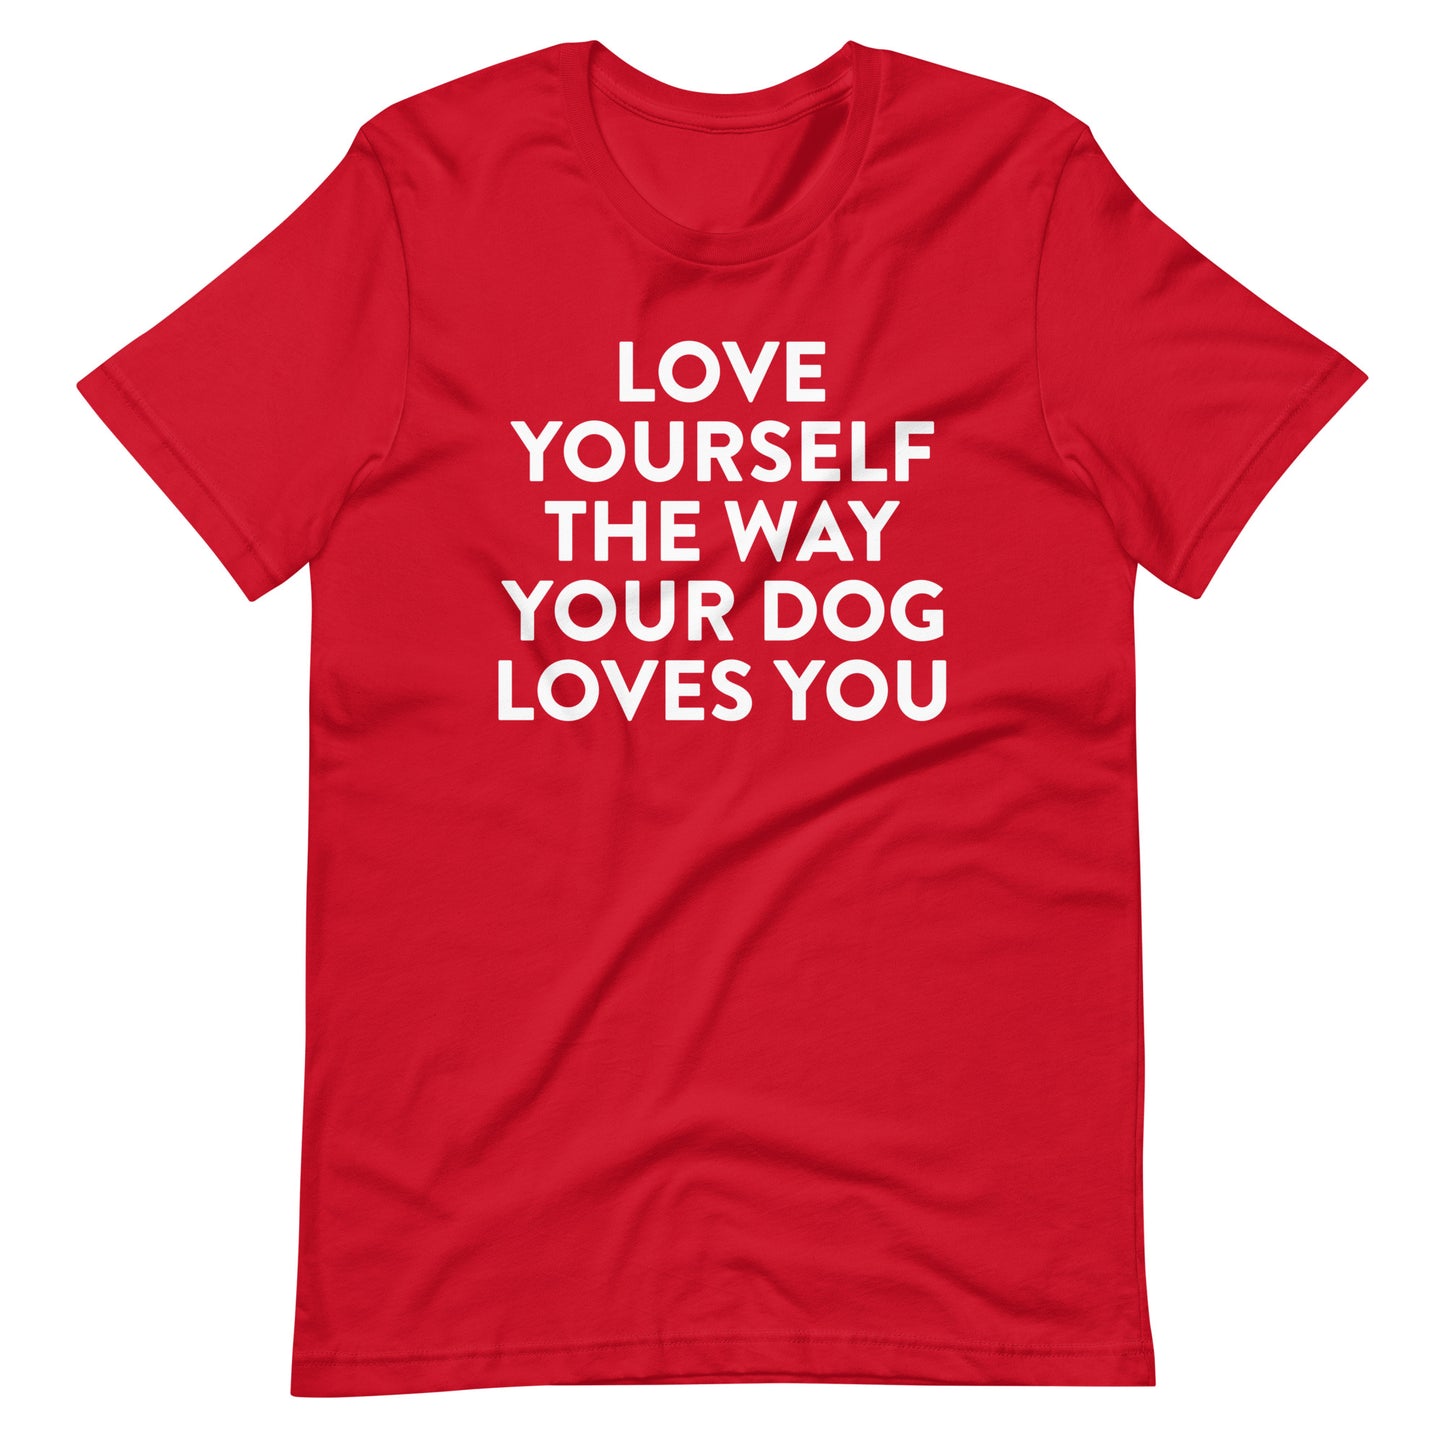 Love Yourself the Way Your Dog Loves You T-Shirt